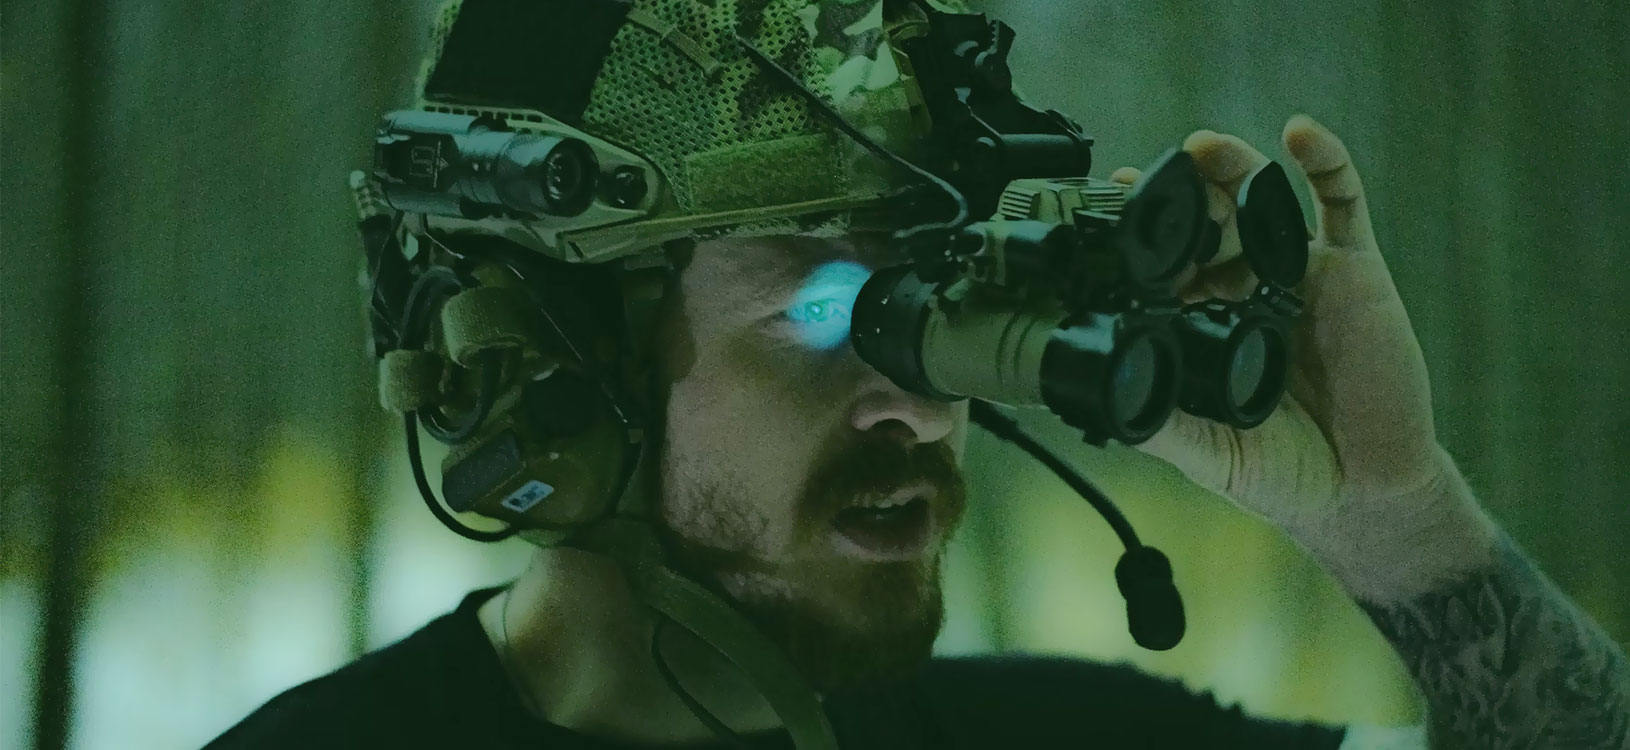 The value of night vision devices in modern warfare.